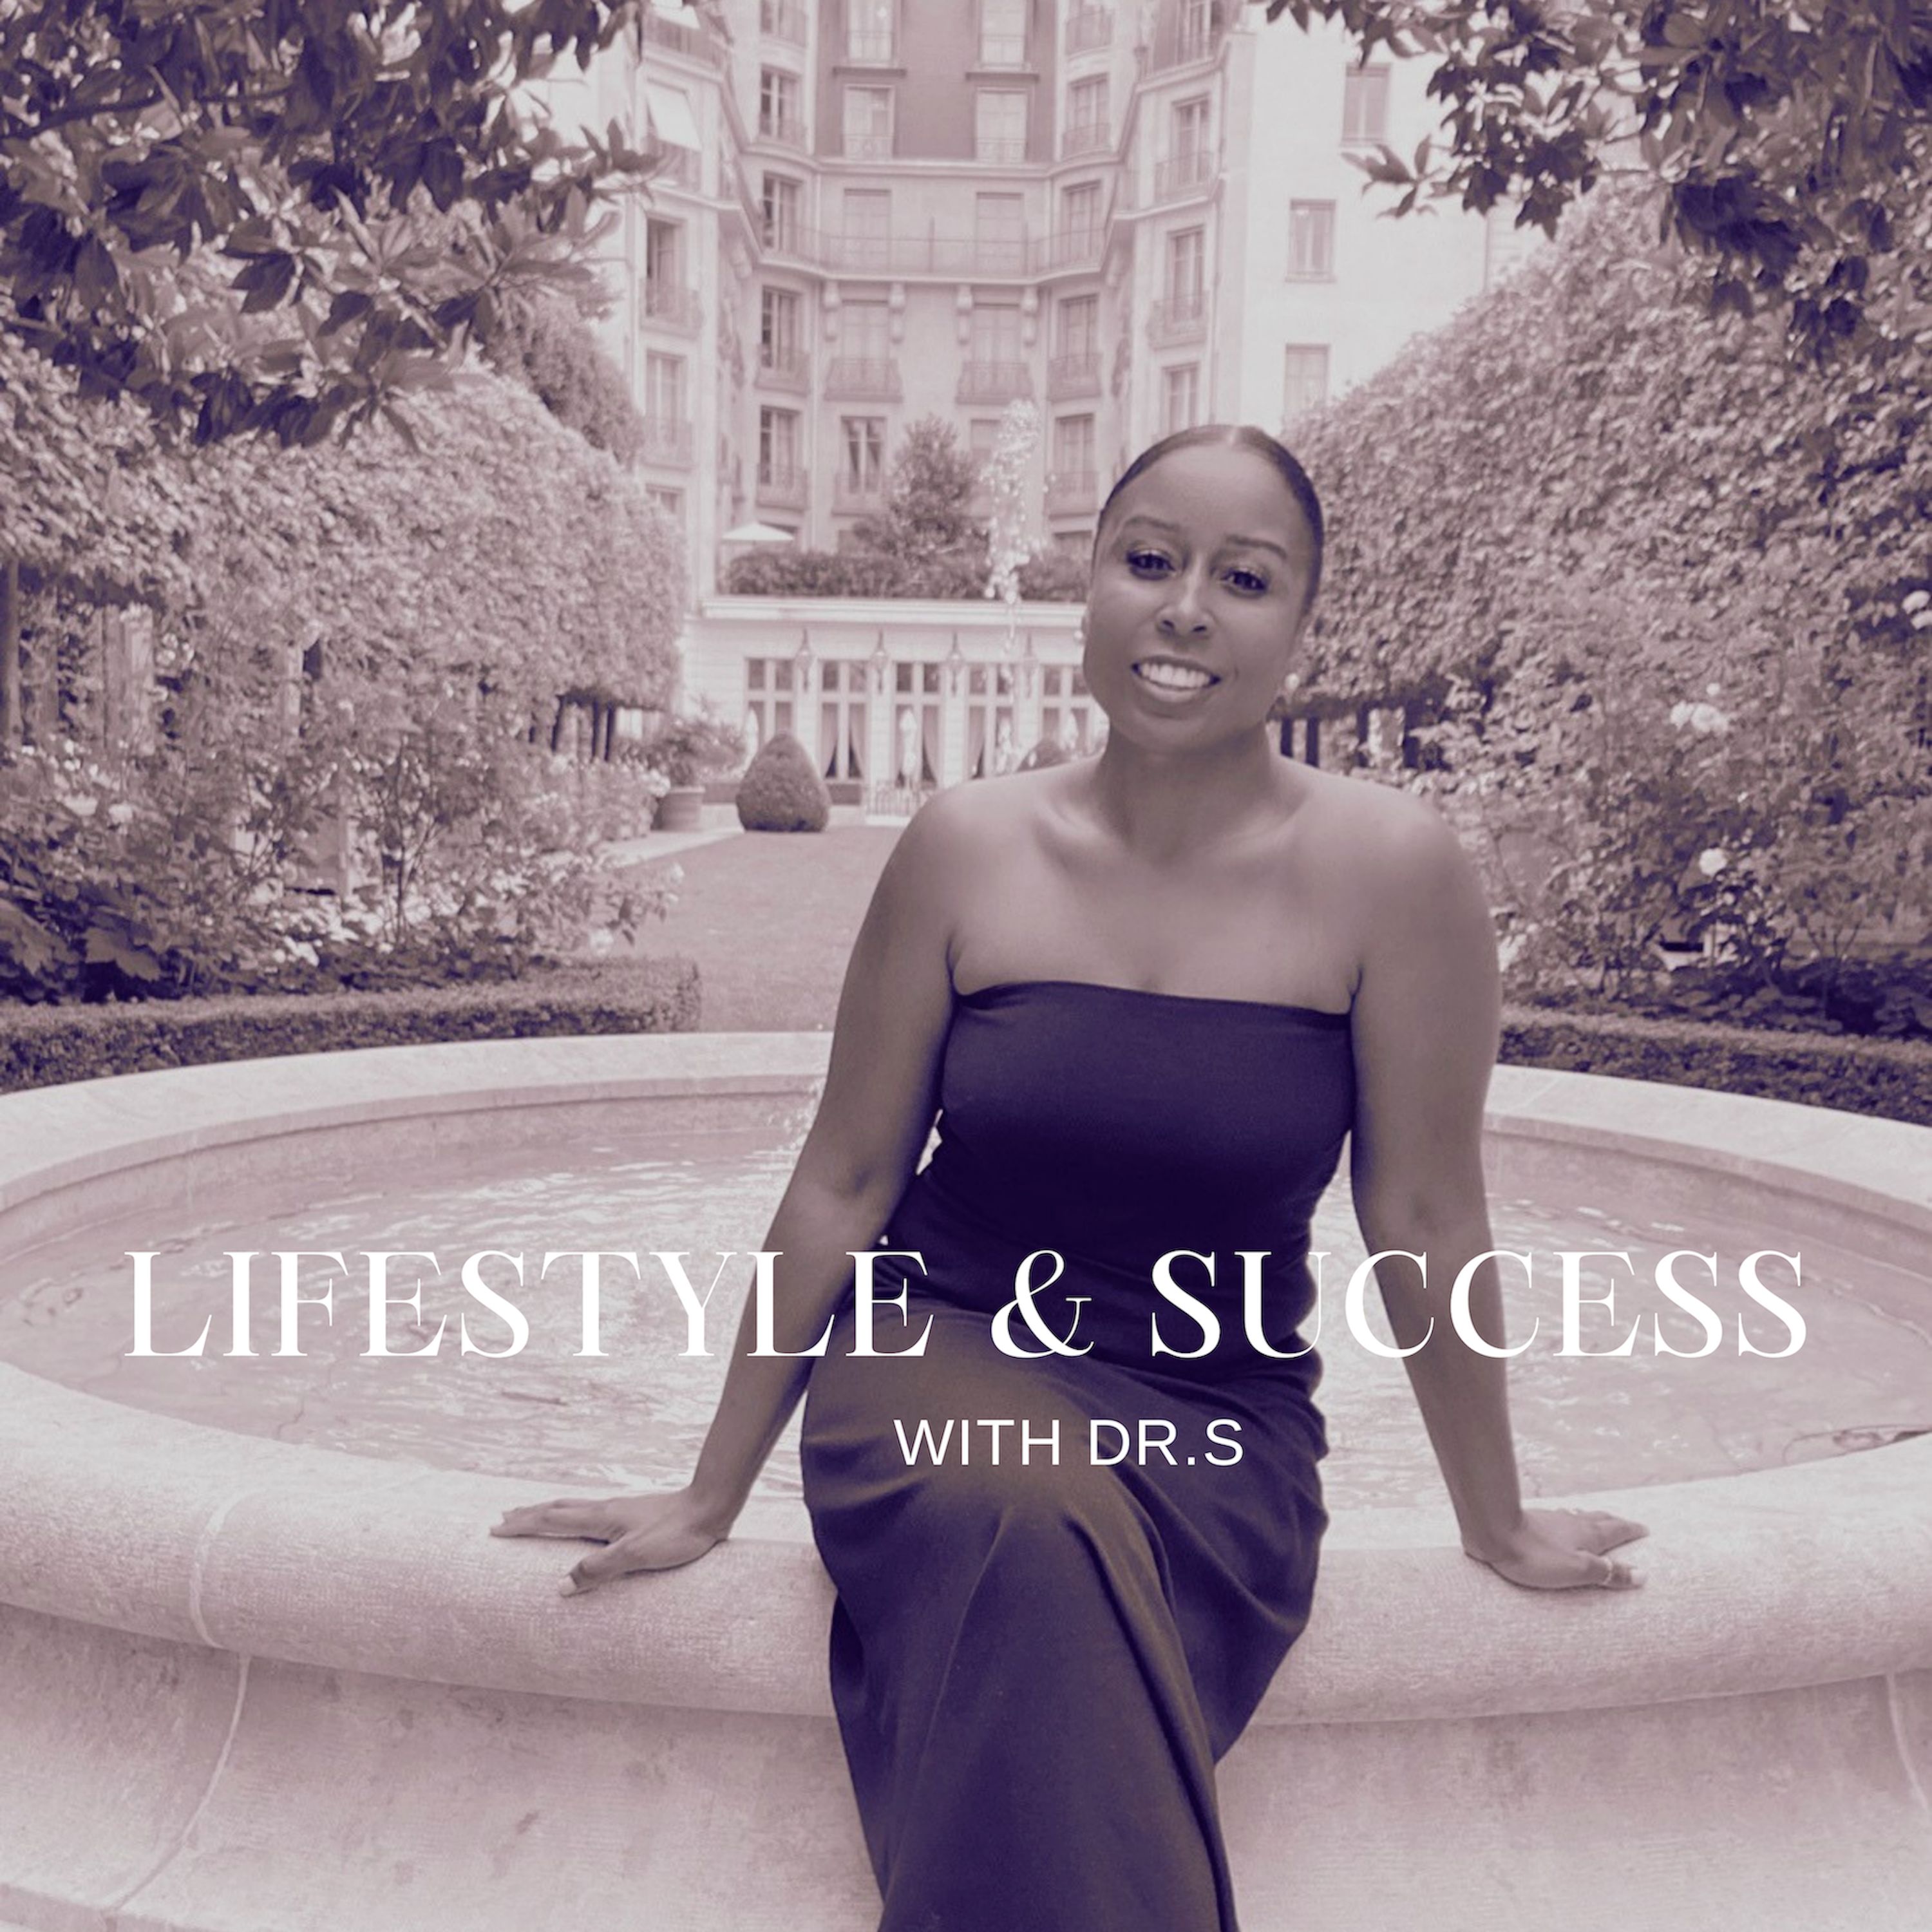 Lifestyle & Success with Dr. S